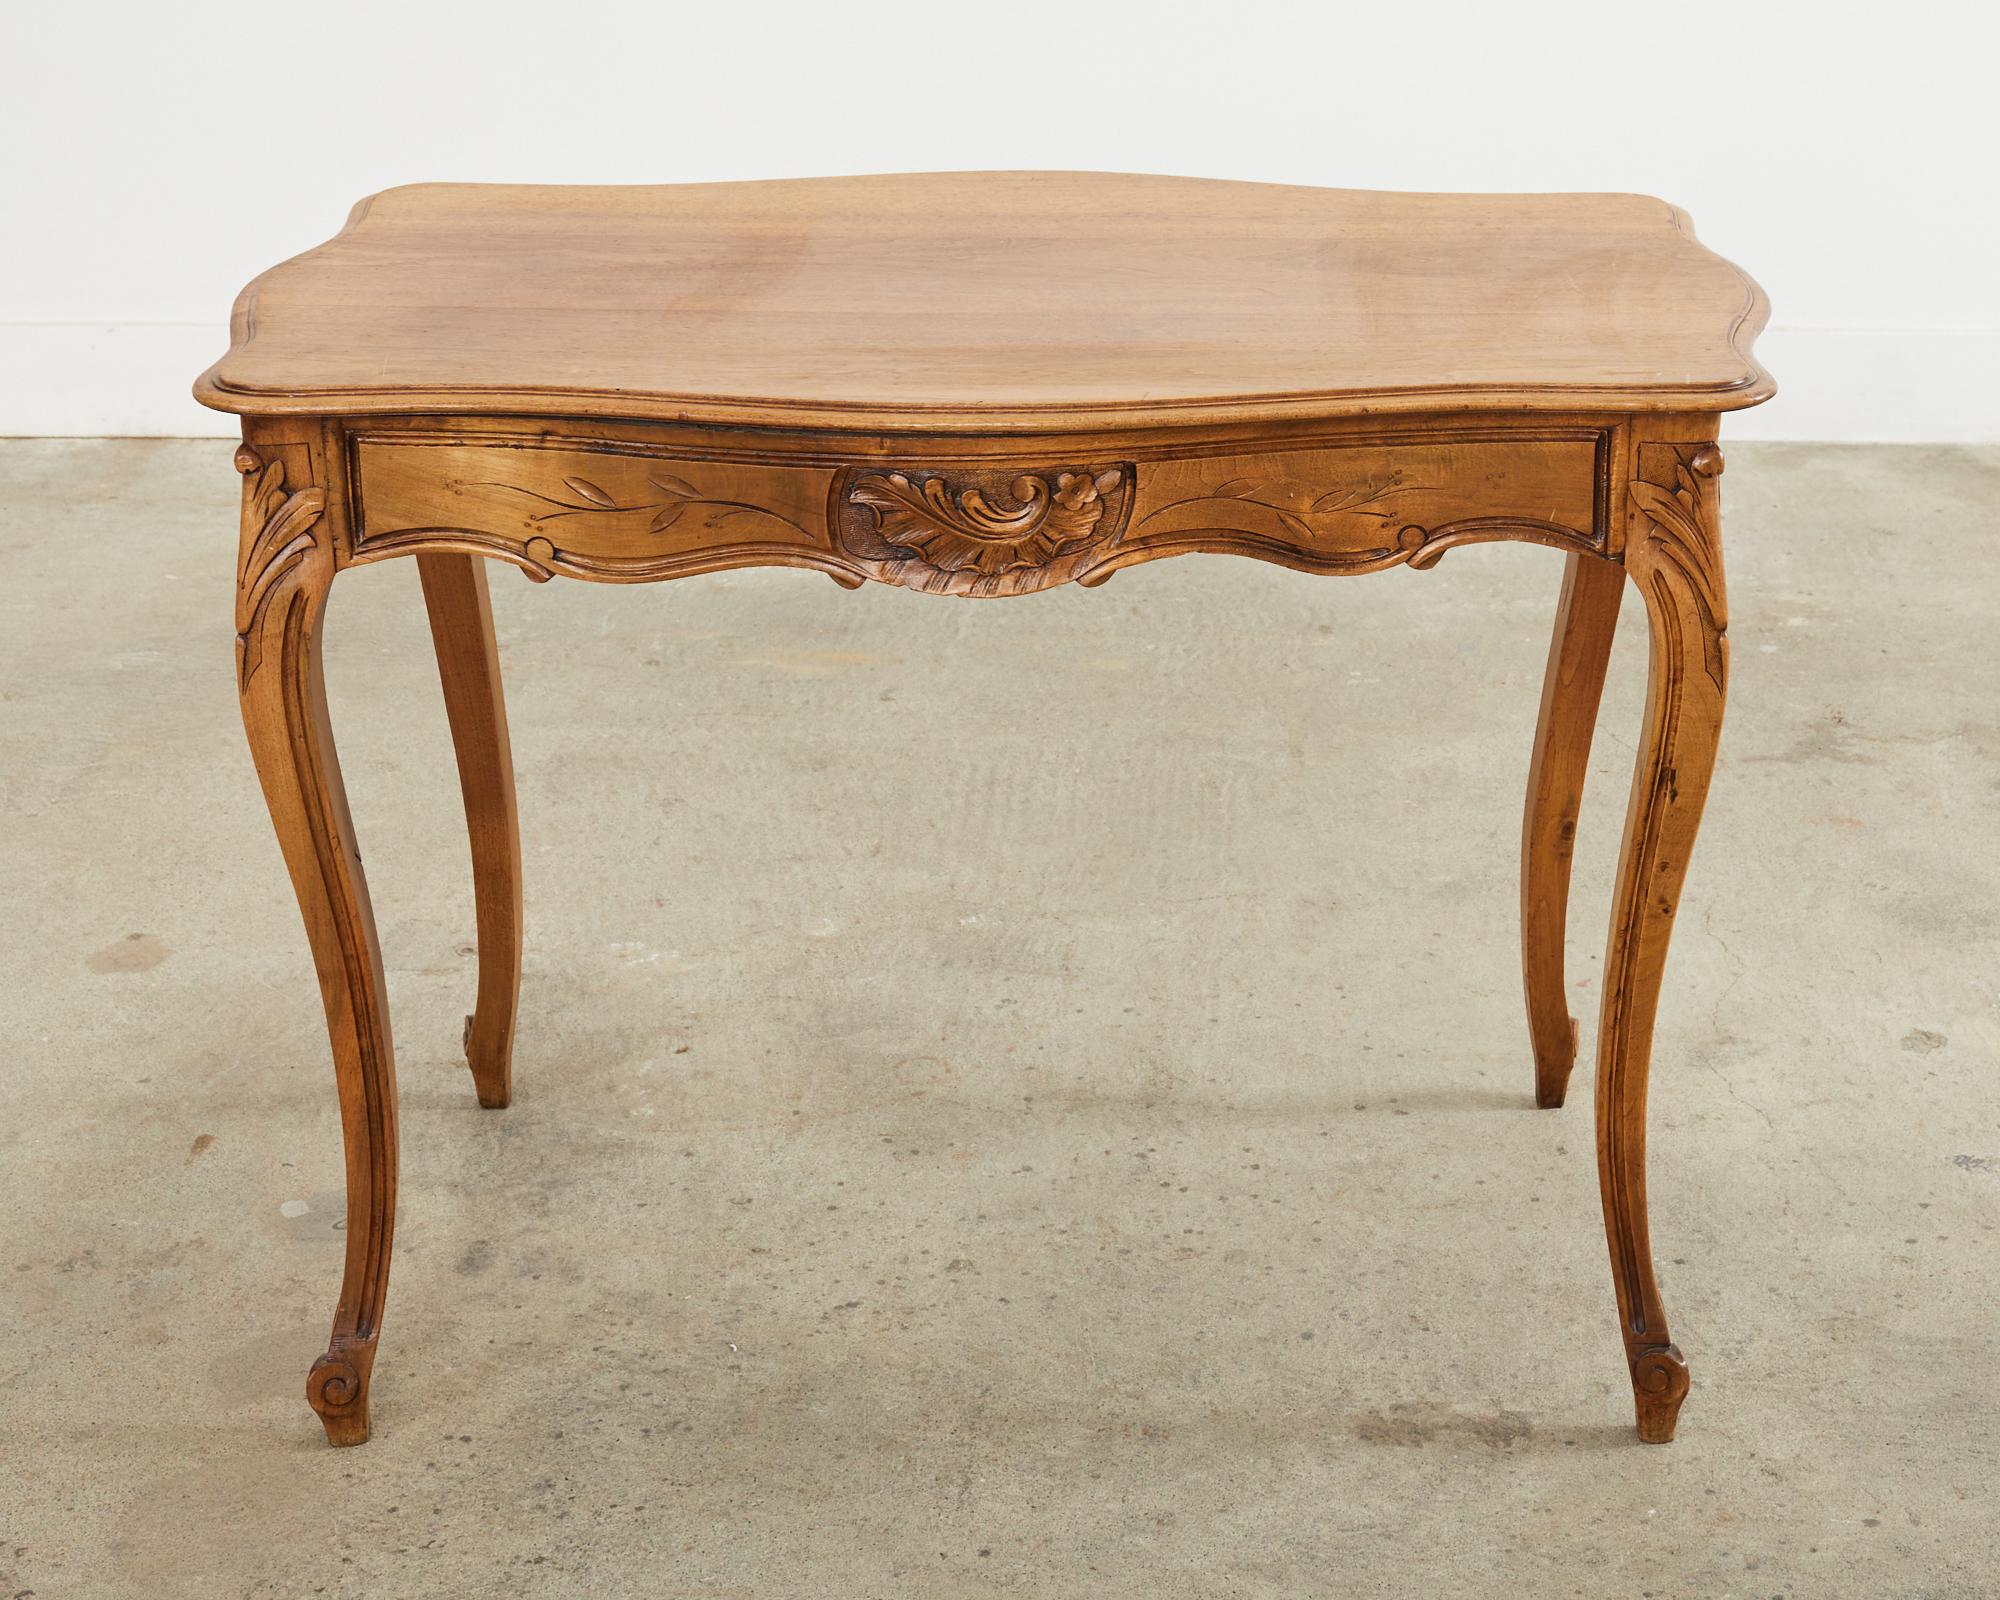 19th Century Country French Provincial Walnut Writing Table Desk In Good Condition For Sale In Rio Vista, CA